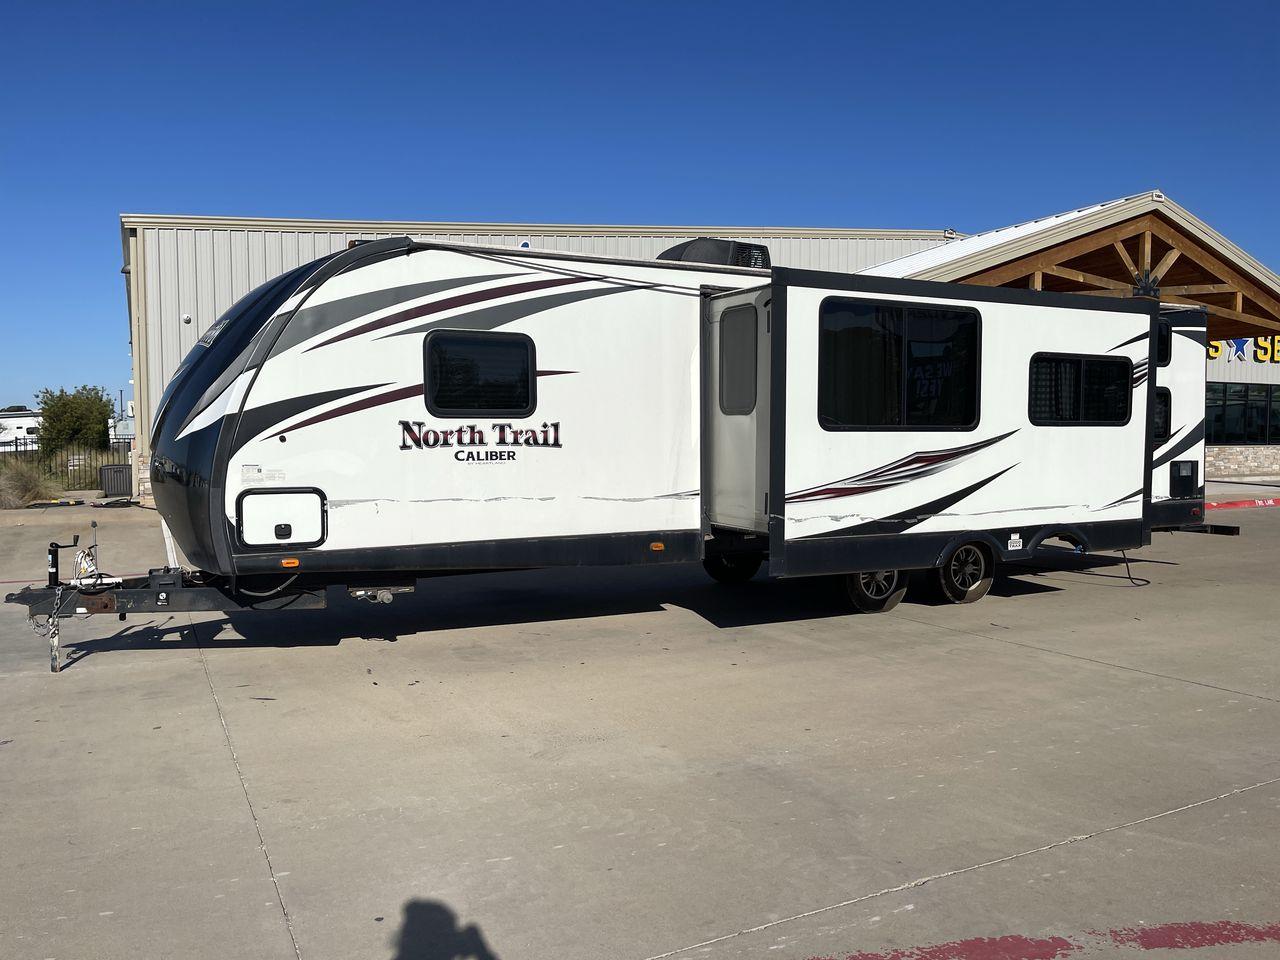 2016 WHITE HEARTLAND NORTH TRAIL 31BHDD - (5SFNB3529GE) , Length: 35.92 ft. | Dry Weight: 6,399 lbs. | Gross Weight: 8,600 lbs. | Slides: 1 transmission, located at 4319 N Main St, Cleburne, TX, 76033, (817) 678-5133, 32.385960, -97.391212 - This 2016 Heartland North Trail NT KING 31BHDD travel trailer measures just under 36' in length. It is a dual axle, steel wheel setup with a dry weight of 6,399 lbs and has a carrying capacity of 2,165 lbs. This travel trailer has one slide. The front of the trailer holds the bedroom. It has a q - Photo #25